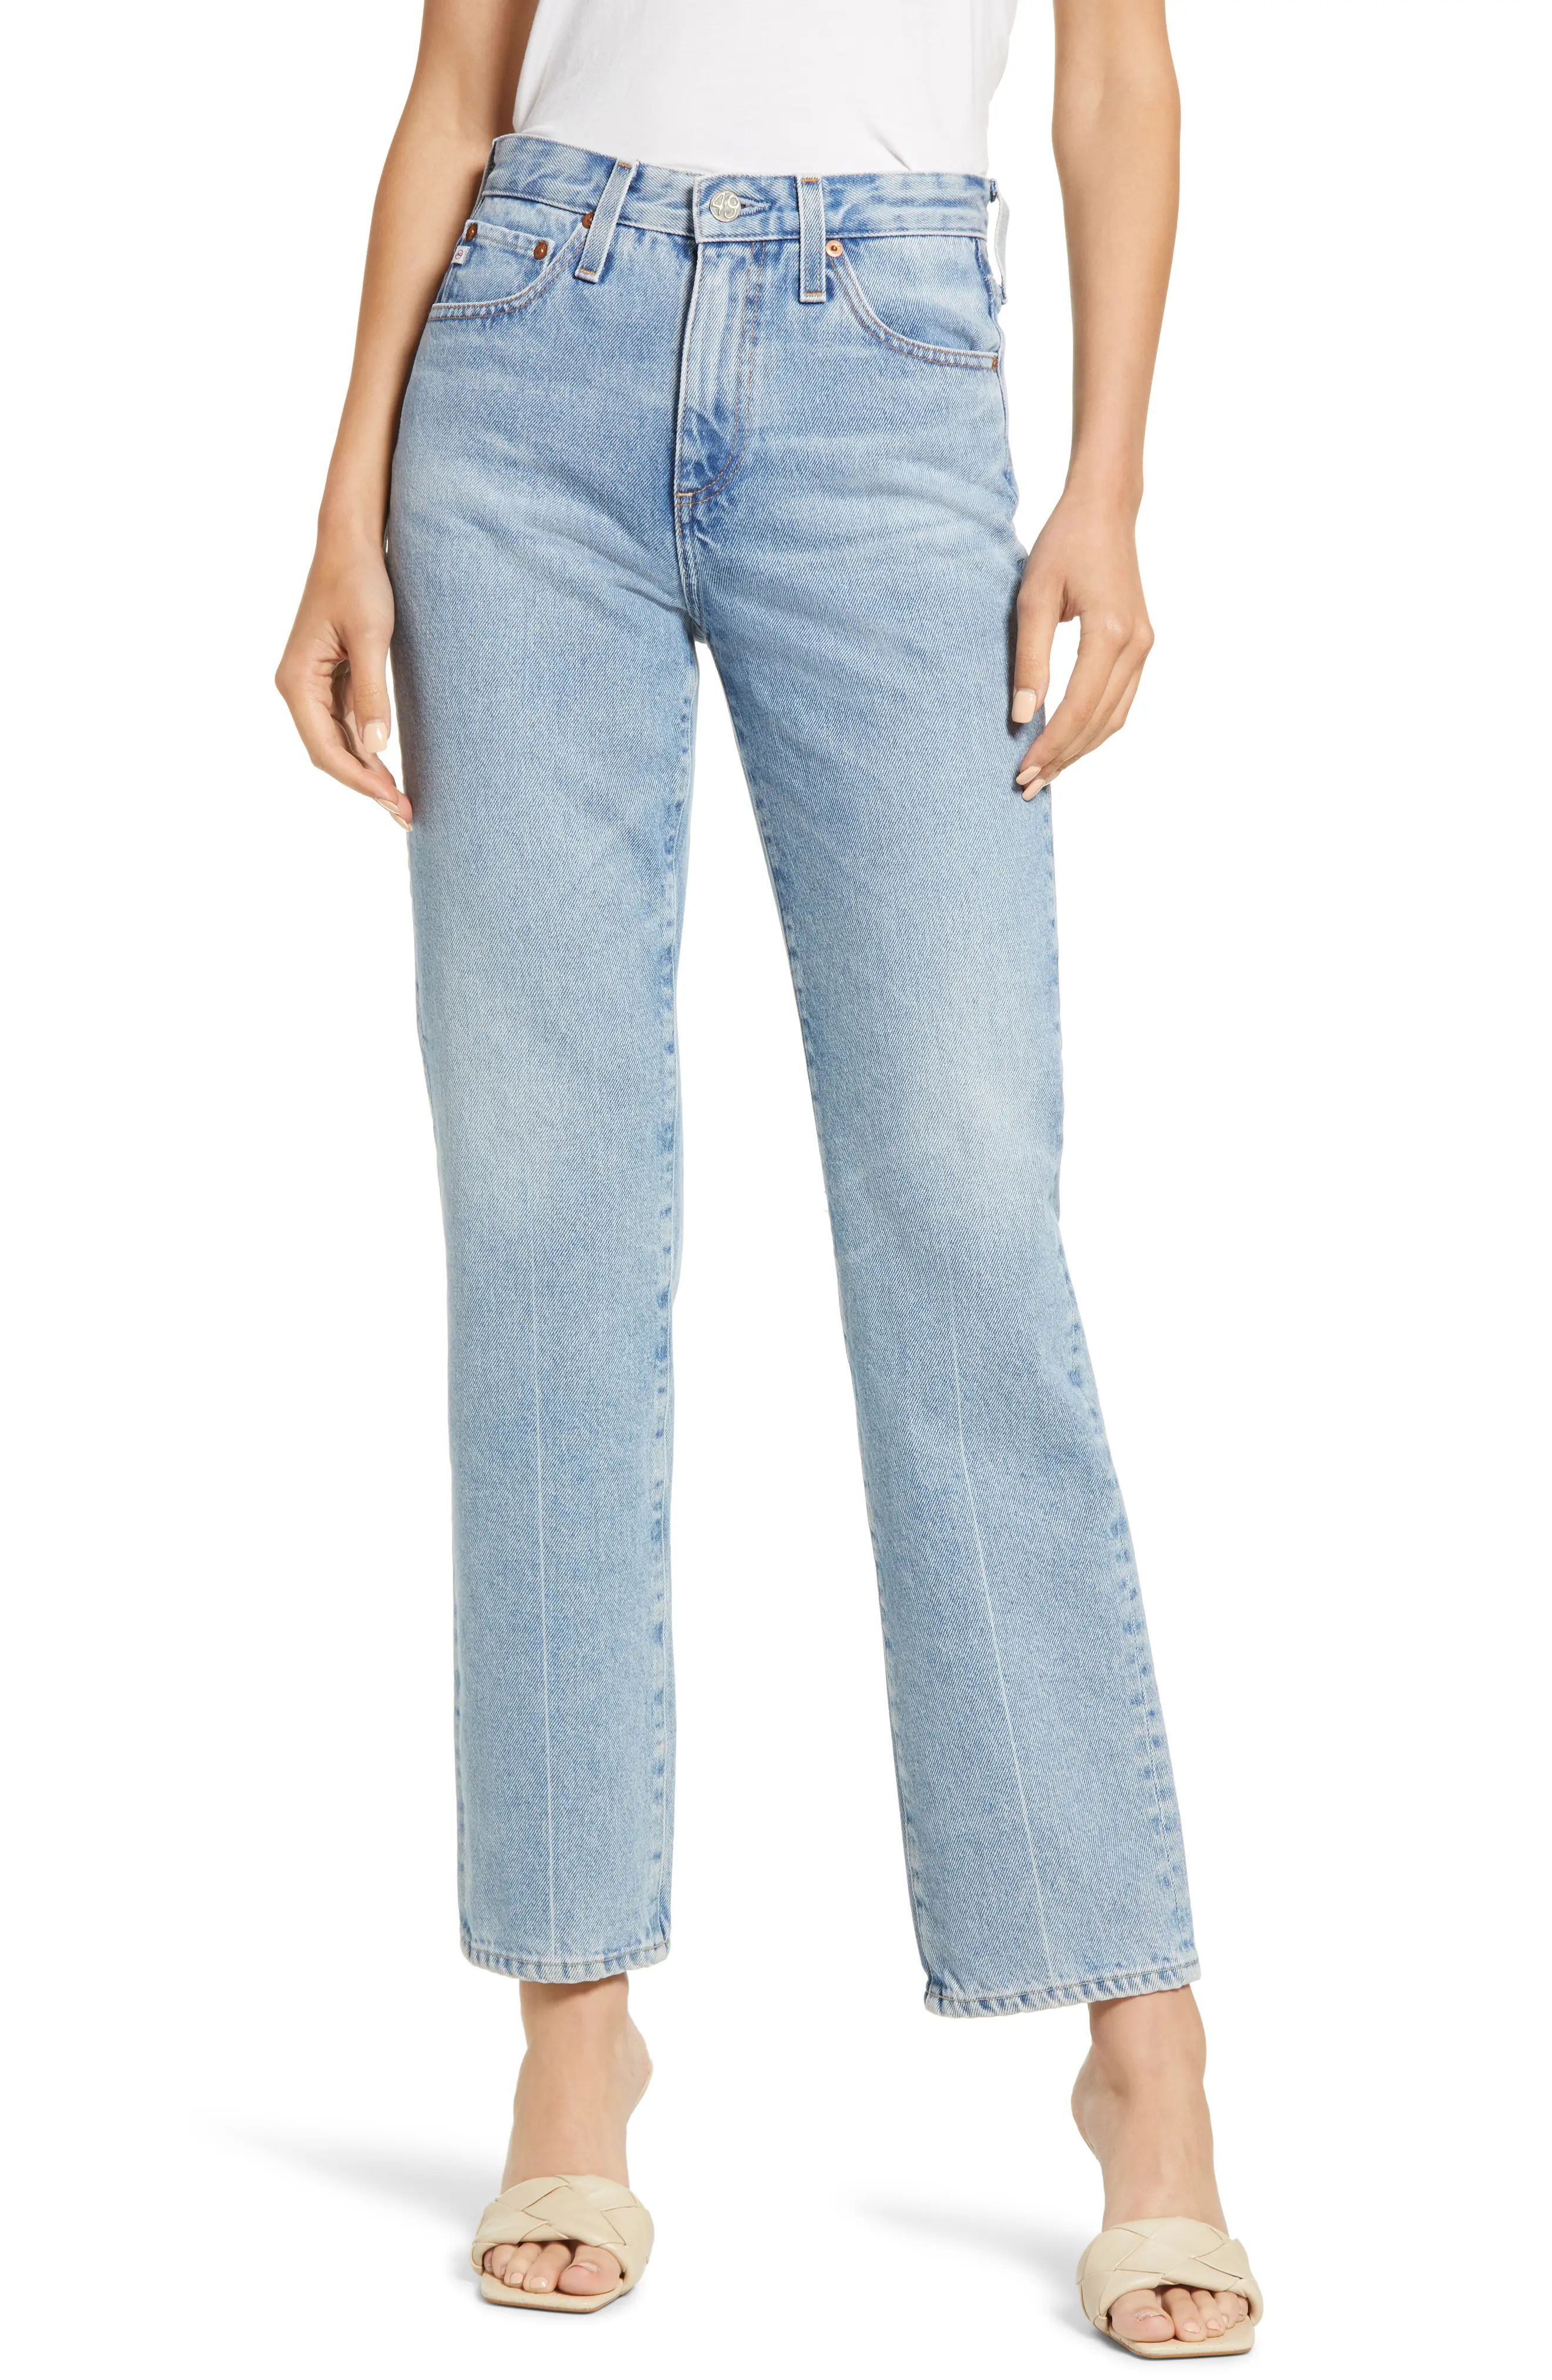 AG Alexxis High Waist Straight Leg Jeans, Size 24 in 21 Years Westside at Nordstrom | Nordstrom